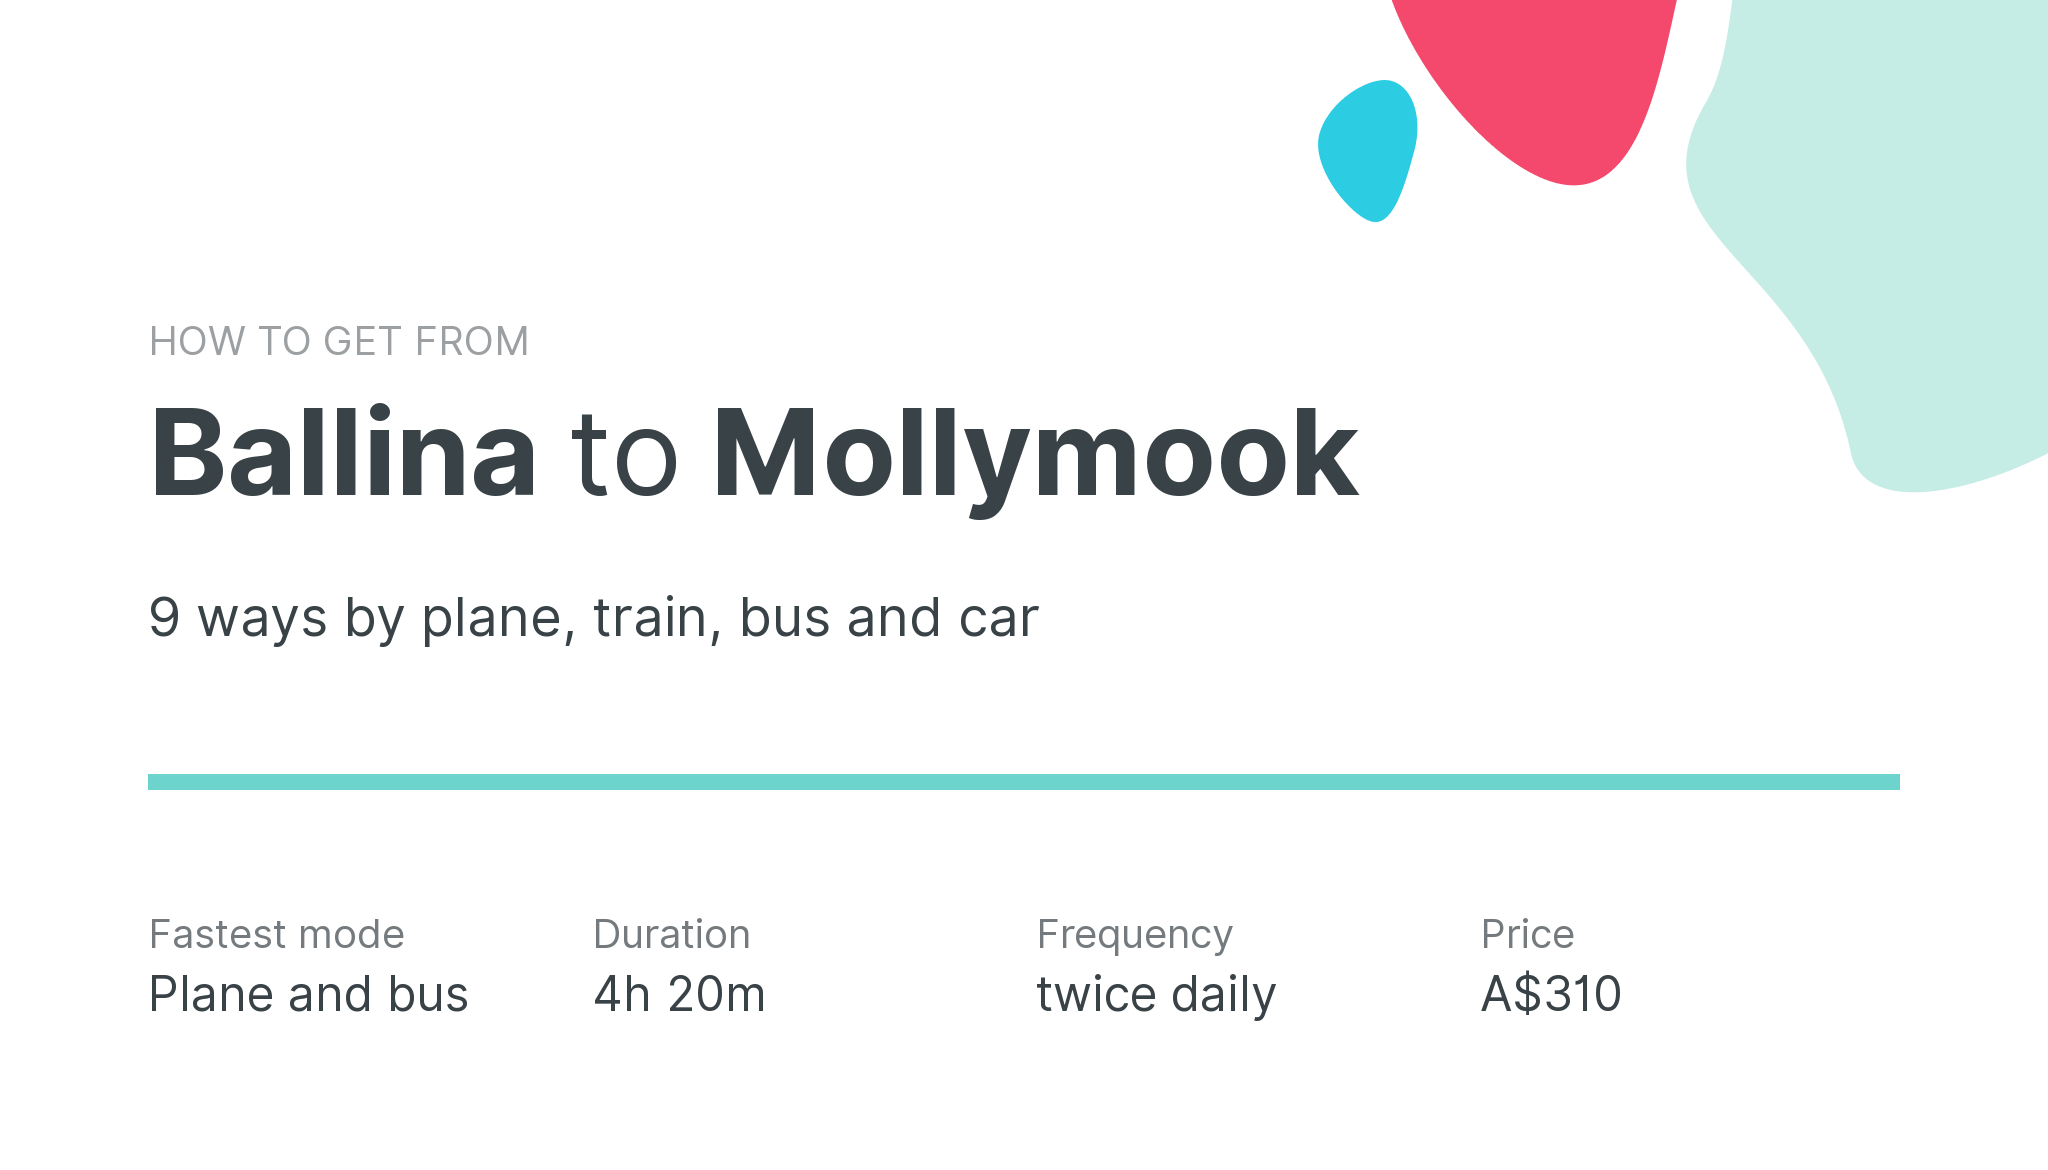 How do I get from Ballina to Mollymook